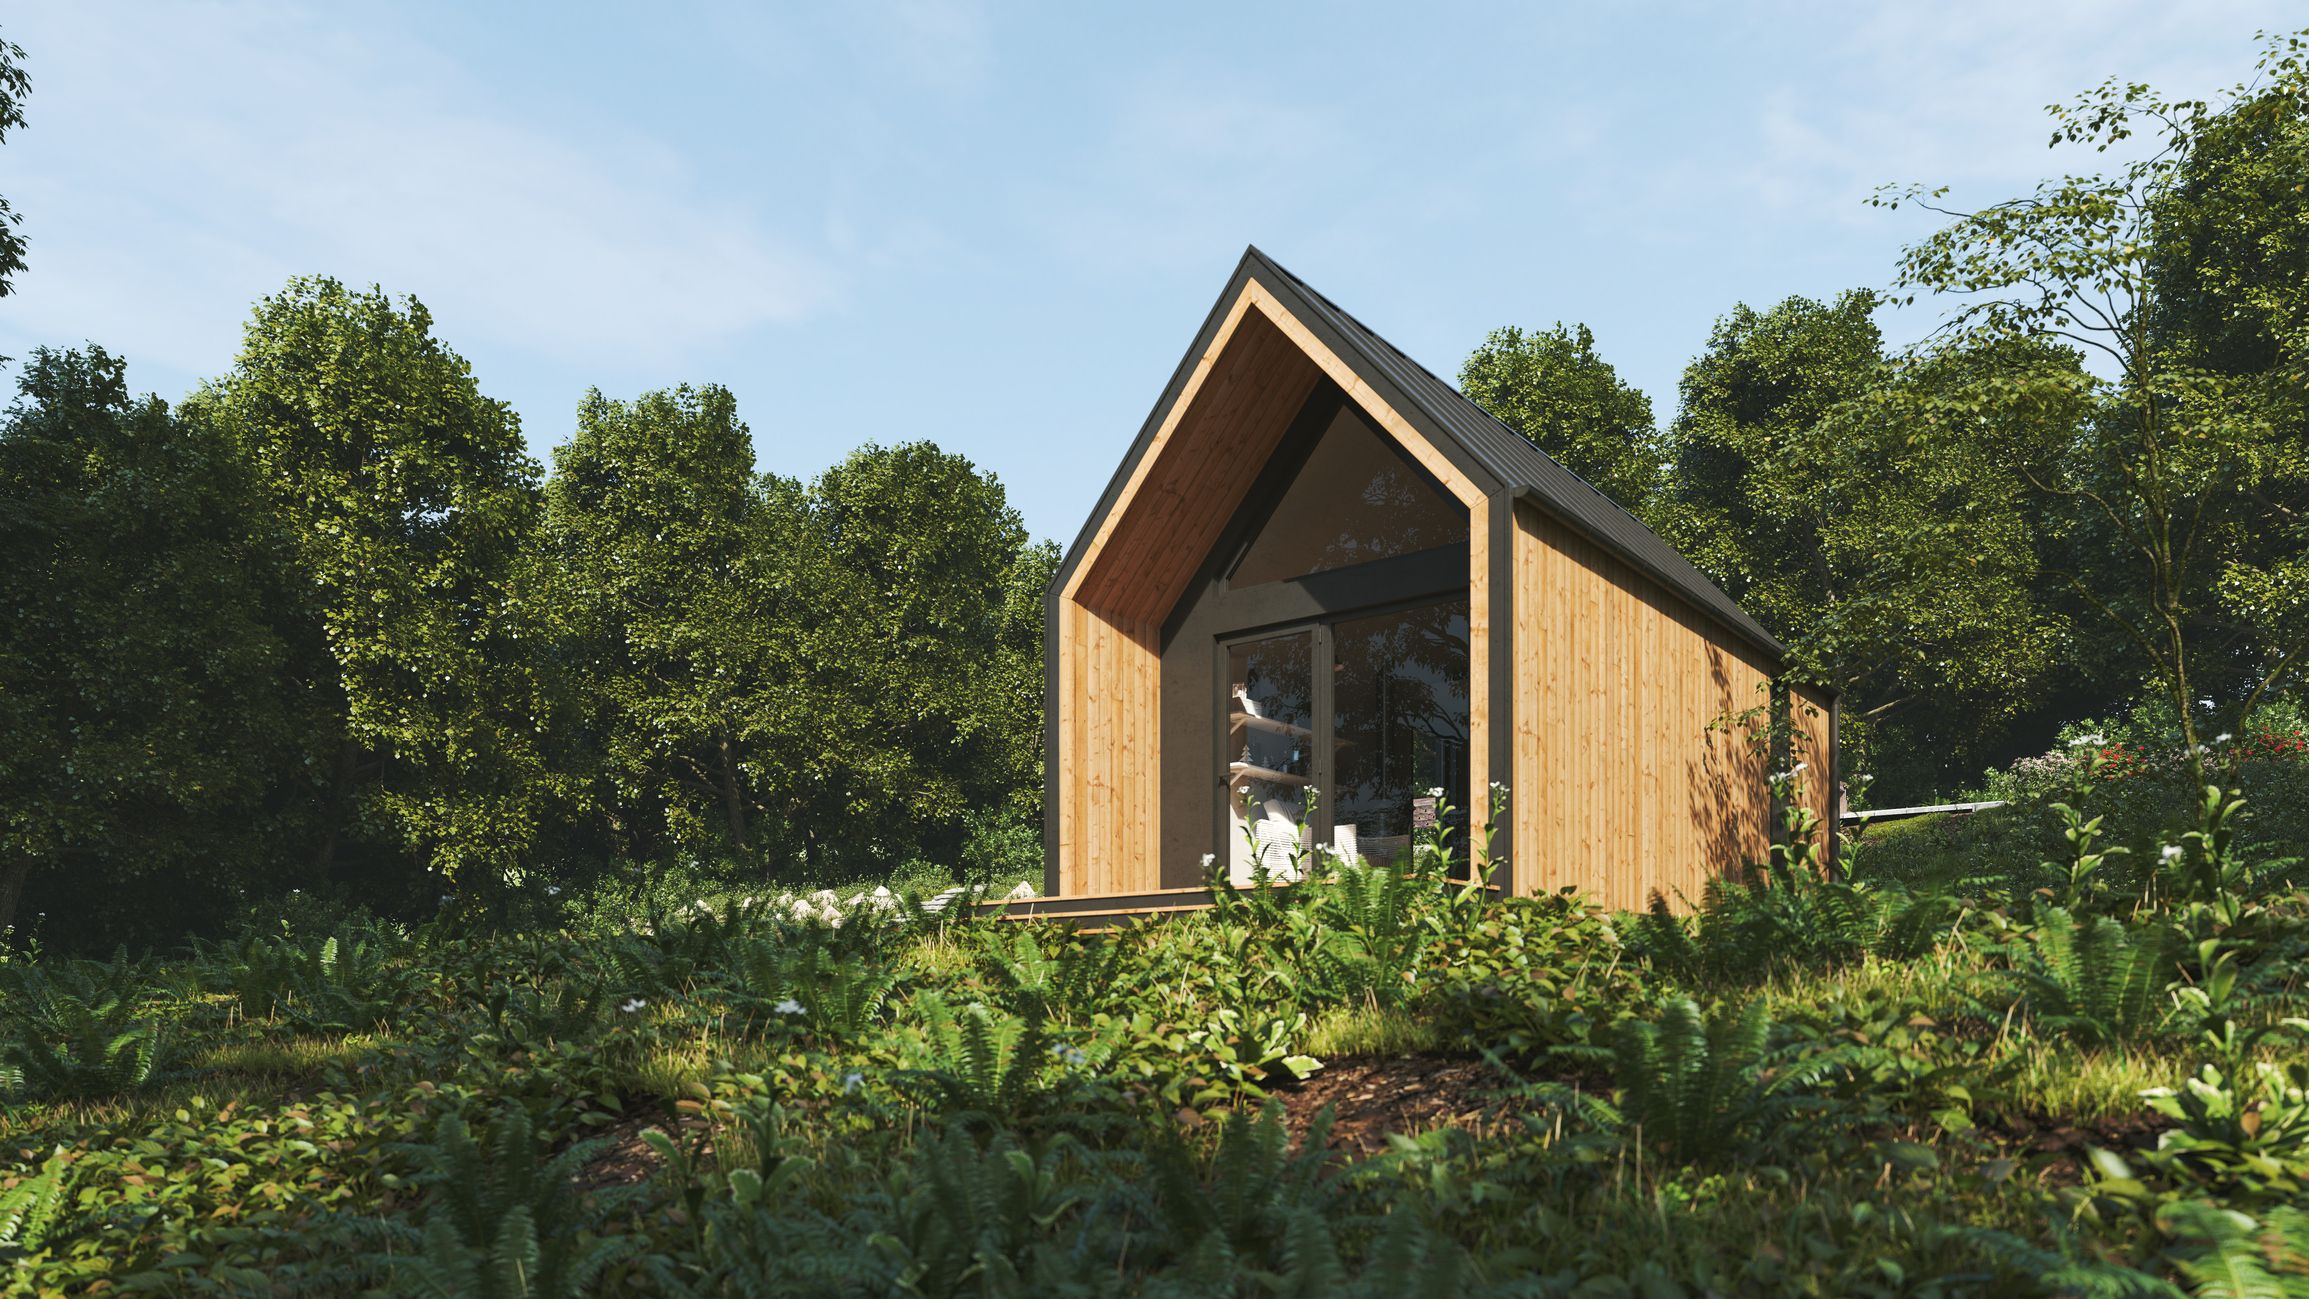 Small Space Living: Tiny House Trend Grows Bigger